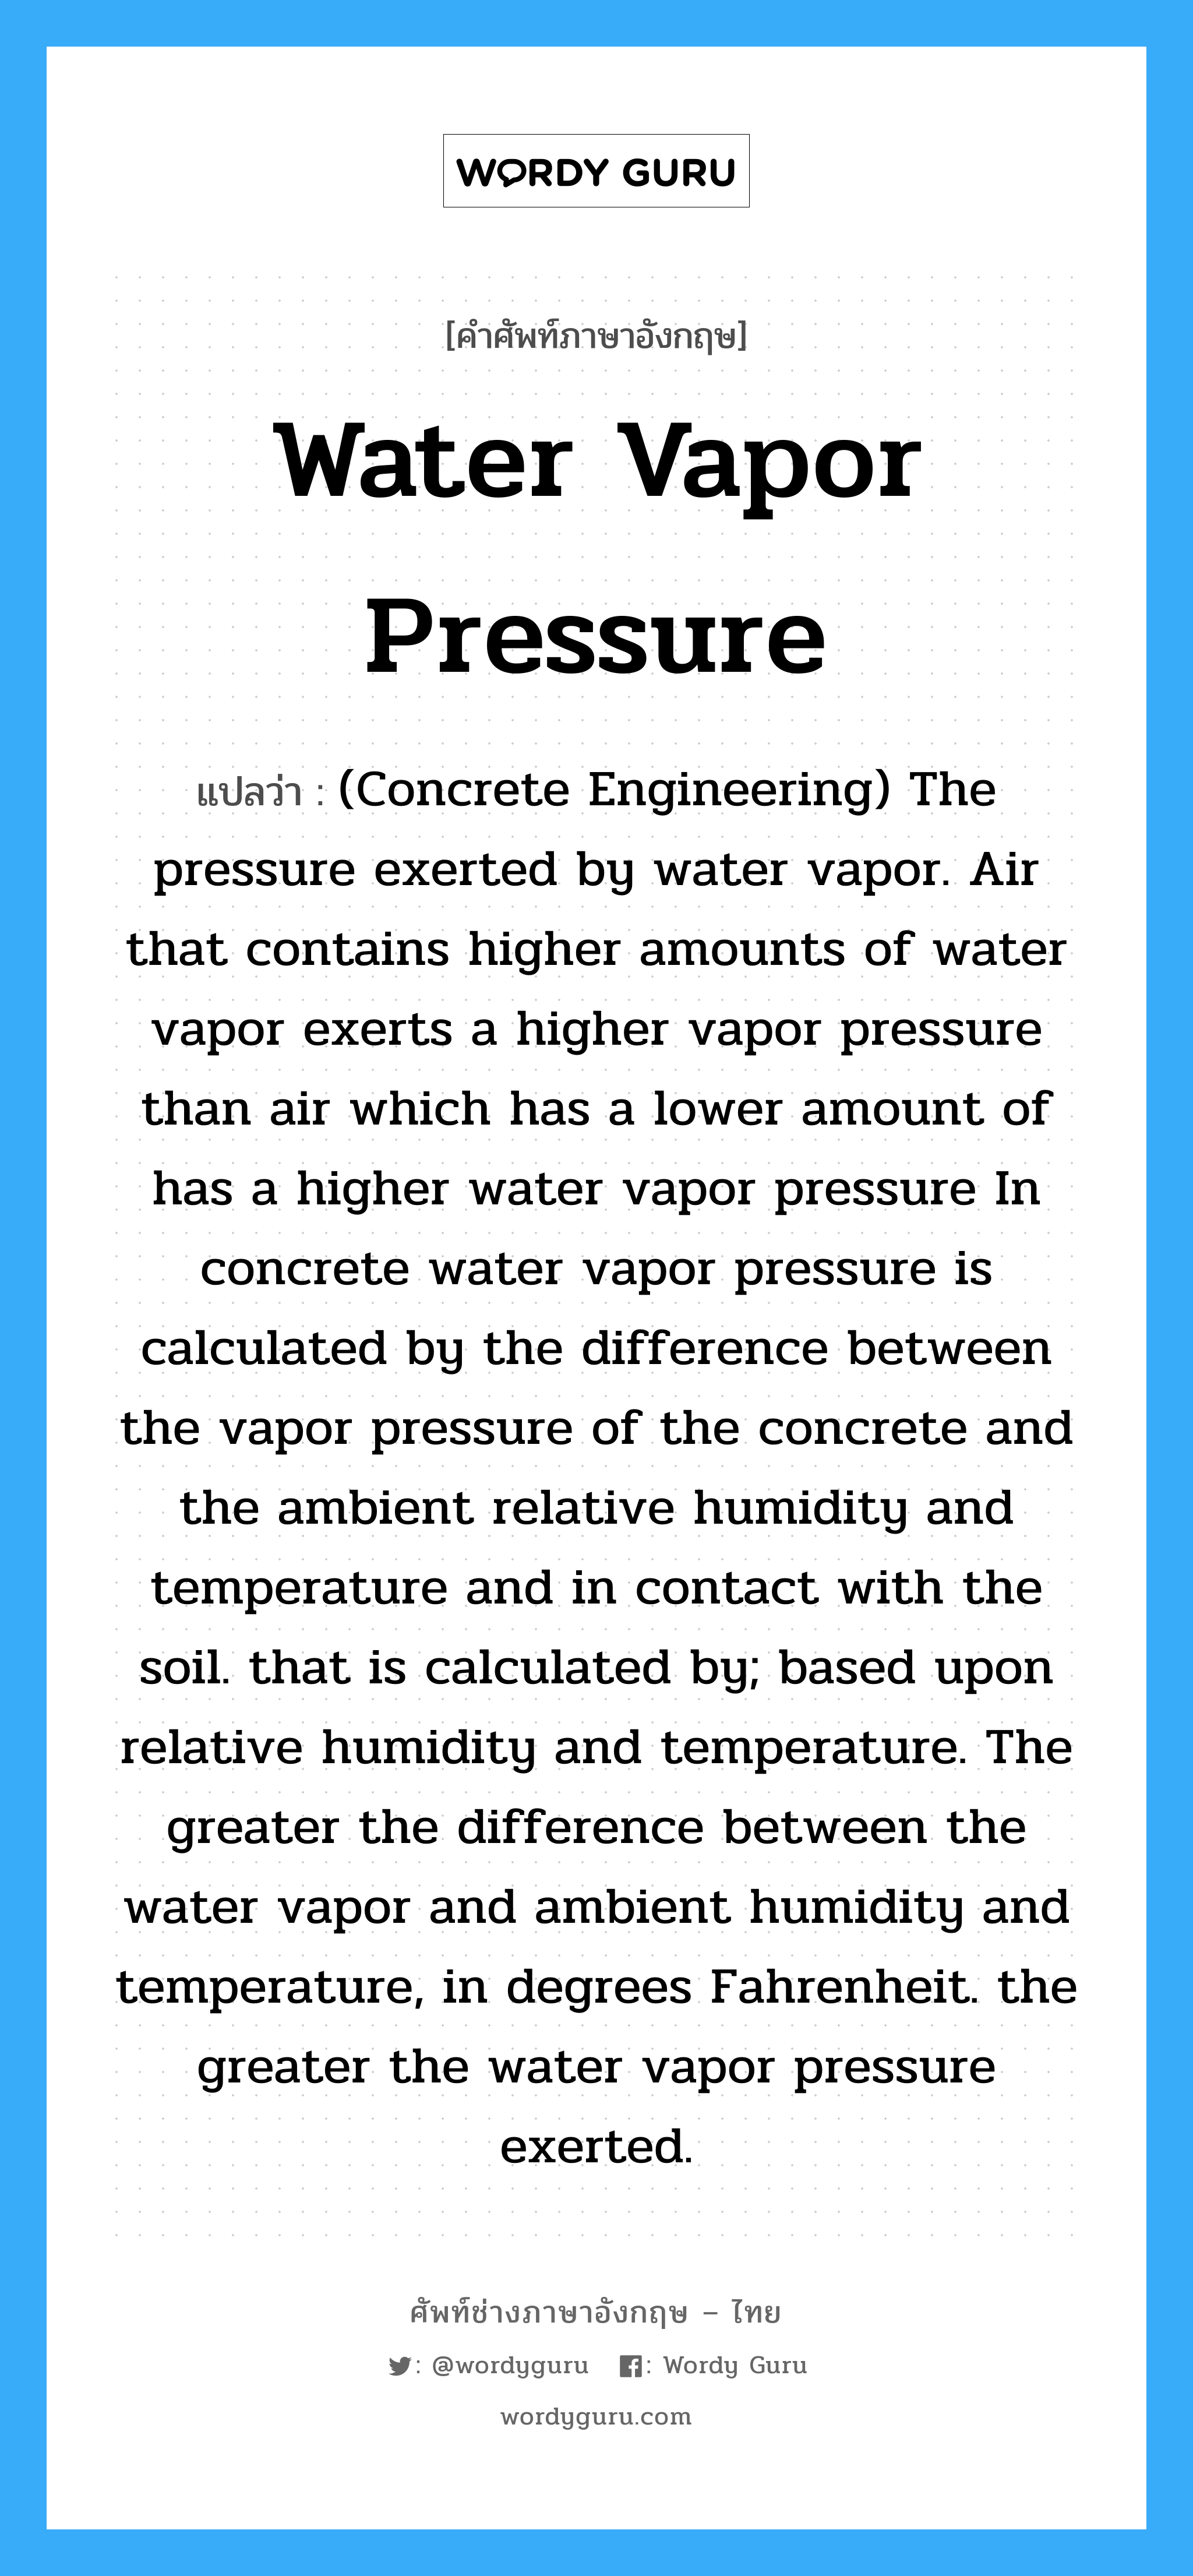 (Concrete Engineering) The pressure exerted by water vapor. Air that contains higher amounts of water vapor exerts a higher vapor pressure than air which has a lower amount of has a higher water vapor pressure In concrete water vapor pressure is calculated by the difference between the vapor pressure of the concrete and the ambient relative humidity and temperature and in contact with the soil. that is calculated by; based upon relative humidity and temperature. The greater the difference between the water vapor and ambient humidity and temperature, in degrees Fahrenheit. the greater the water vapor pressure exerted. ภาษาอังกฤษ?, คำศัพท์ช่างภาษาอังกฤษ - ไทย (Concrete Engineering) The pressure exerted by water vapor. Air that contains higher amounts of water vapor exerts a higher vapor pressure than air which has a lower amount of has a higher water vapor pressure In concrete water vapor pressure is calculated by the difference between the vapor pressure of the concrete and the ambient relative humidity and temperature and in contact with the soil. that is calculated by; based upon relative humidity and temperature. The greater the difference between the water vapor and ambient humidity and temperature, in degrees Fahrenheit. the greater the water vapor pressure exerted. คำศัพท์ภาษาอังกฤษ (Concrete Engineering) The pressure exerted by water vapor. Air that contains higher amounts of water vapor exerts a higher vapor pressure than air which has a lower amount of has a higher water vapor pressure In concrete water vapor pressure is calculated by the difference between the vapor pressure of the concrete and the ambient relative humidity and temperature and in contact with the soil. that is calculated by; based upon relative humidity and temperature. The greater the difference between the water vapor and ambient humidity and temperature, in degrees Fahrenheit. the greater the water vapor pressure exerted. แปลว่า Water Vapor Pressure